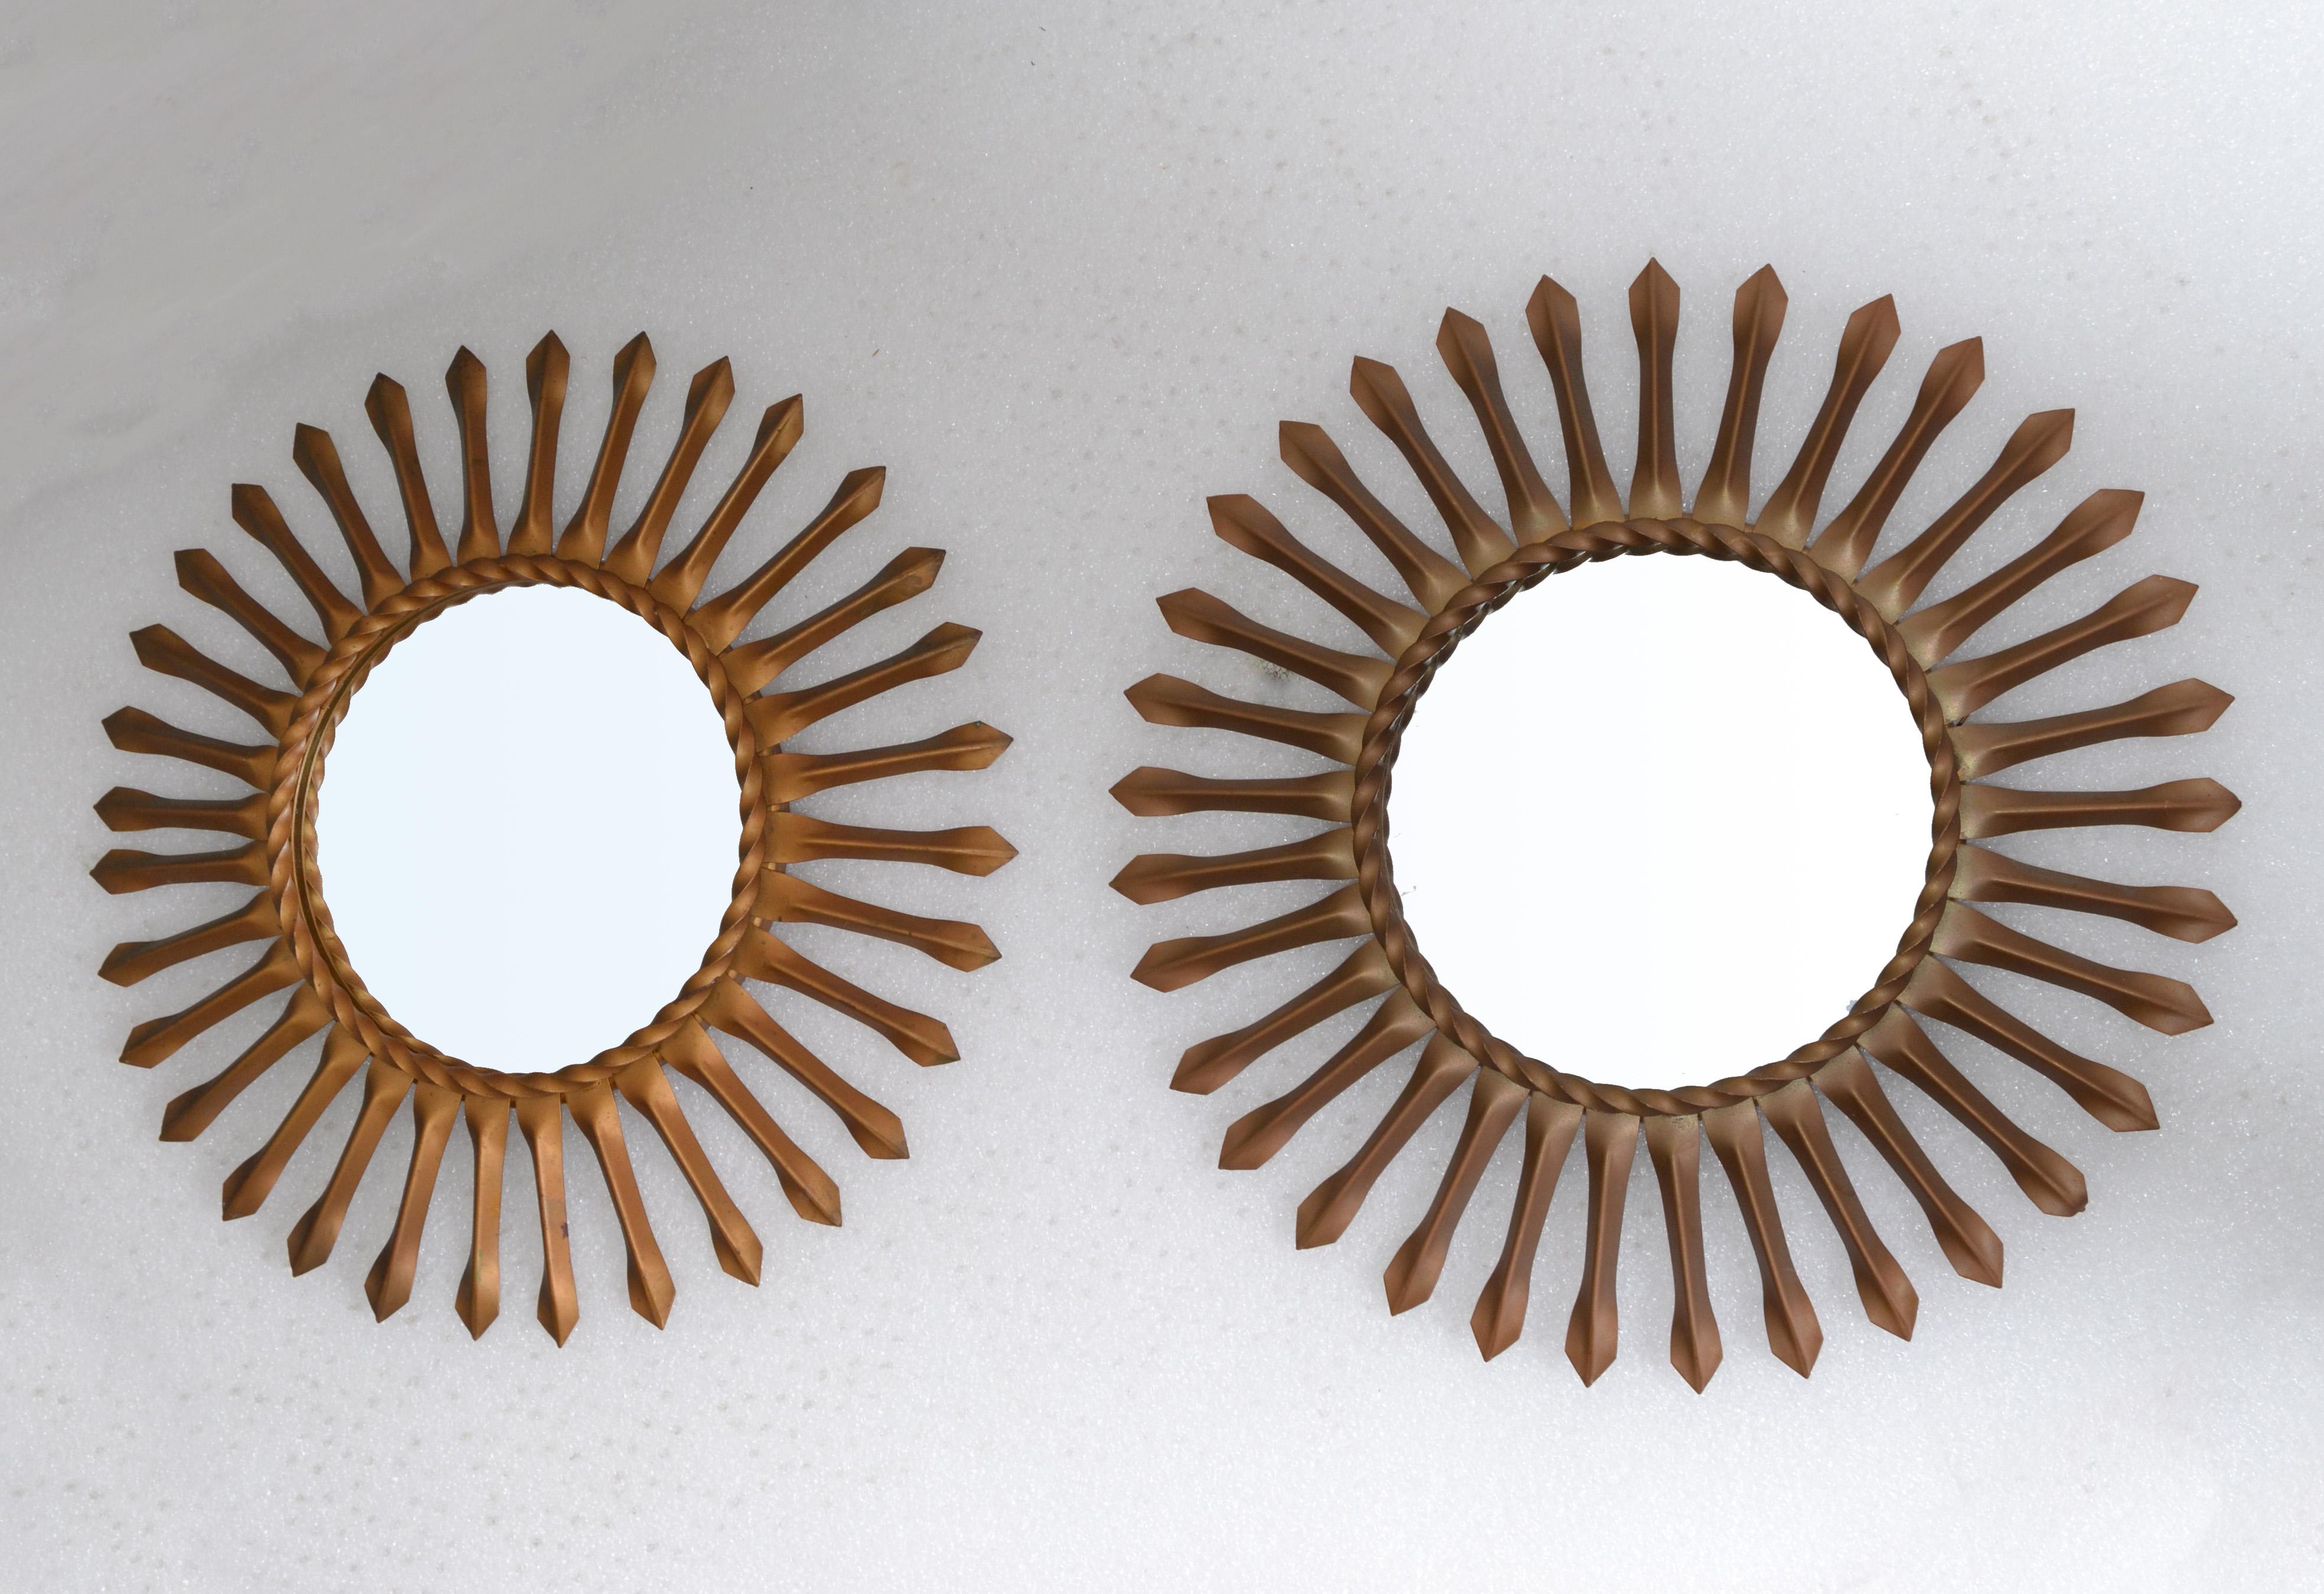 French Set, Two Sunburst Wall Mirror in Gold Brass Finish Signed Chaty Vallauris, 1960 For Sale